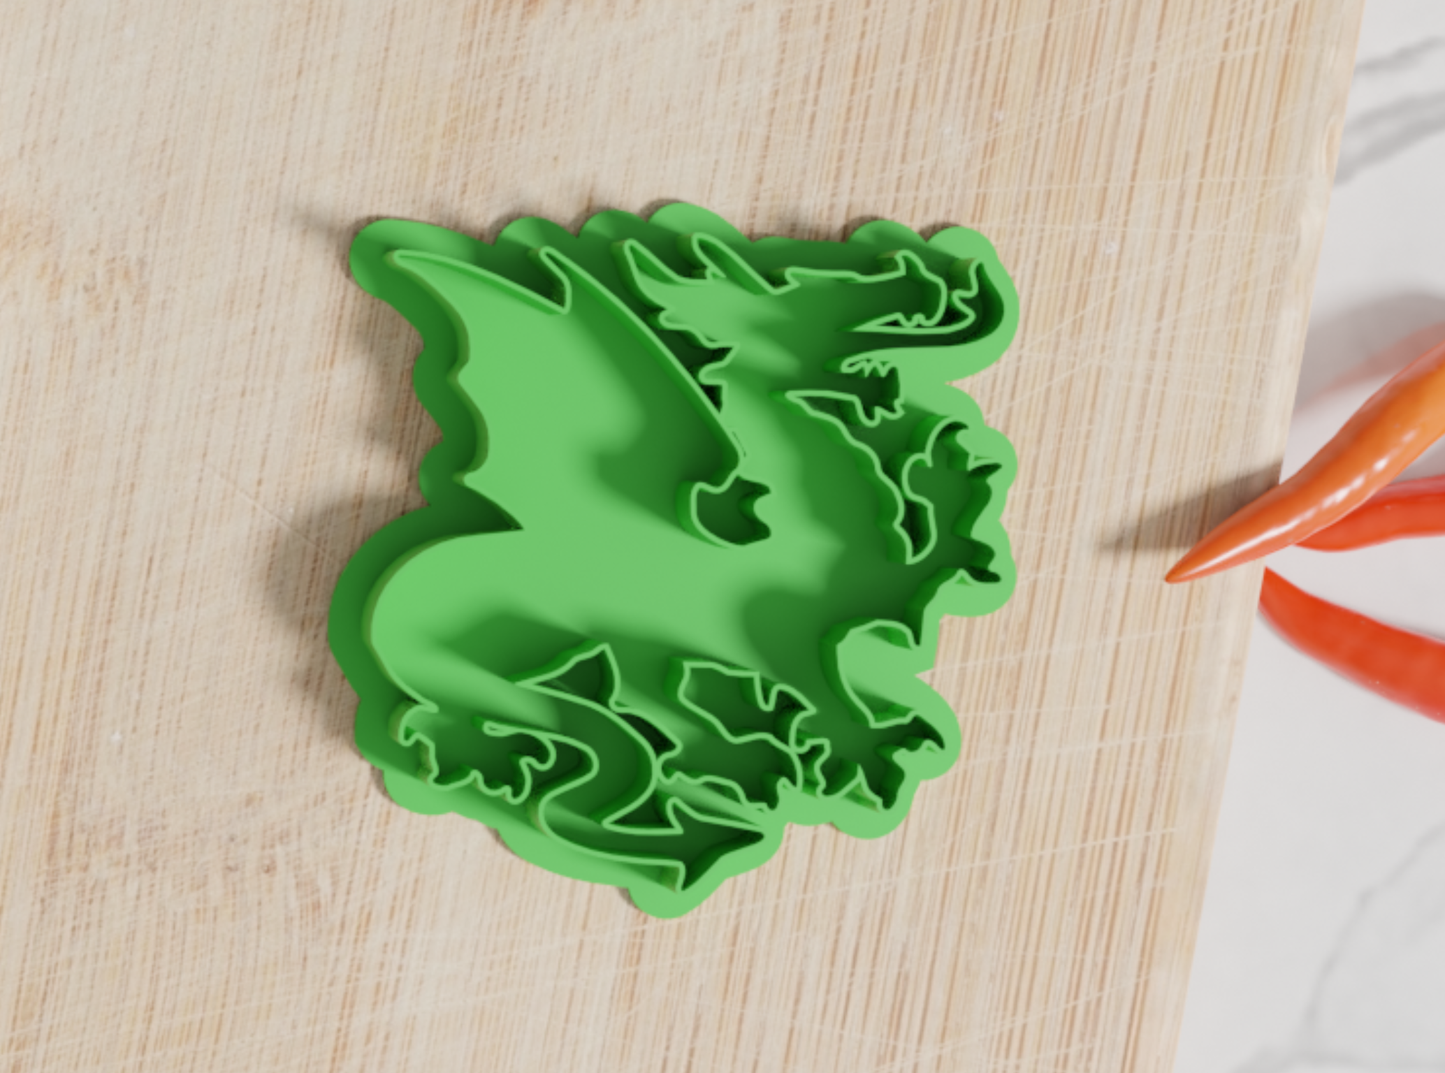 Welsh Dragon Cookie Cutter. Multiple Sizes And Colors. Welsh Dragon Cookie Cutter Matches Our Other Sets